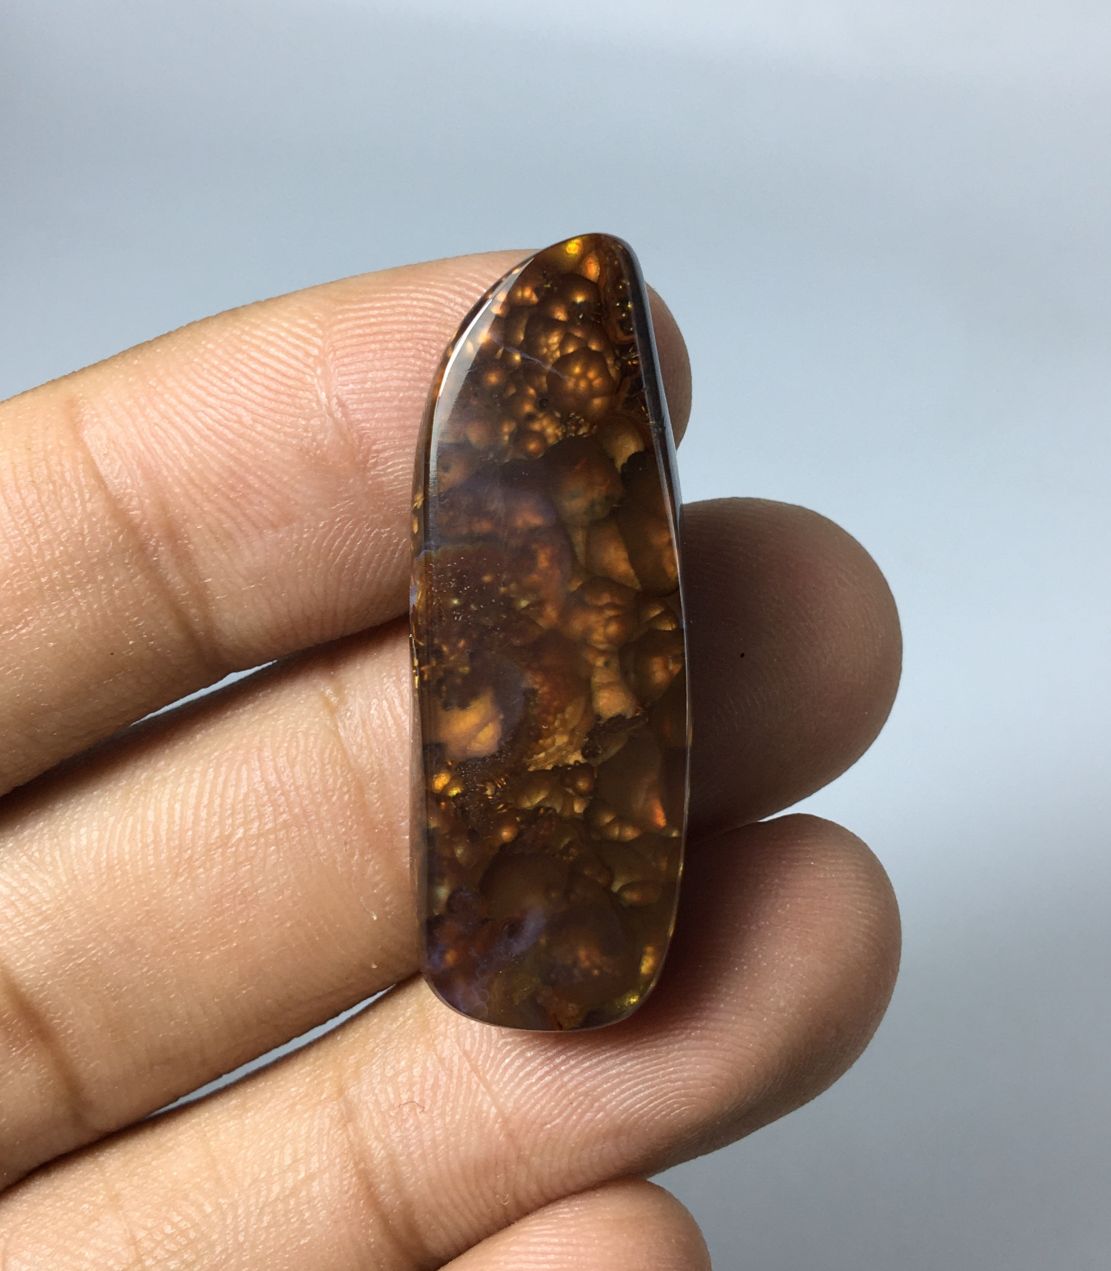 30.95ct Mexican Unique Fire Agate, Convex Bubble Pattern Fire Agate - Perfect Gemstone Gift For All, Flowery Fire Agate, Dimensions 37x13x6mm